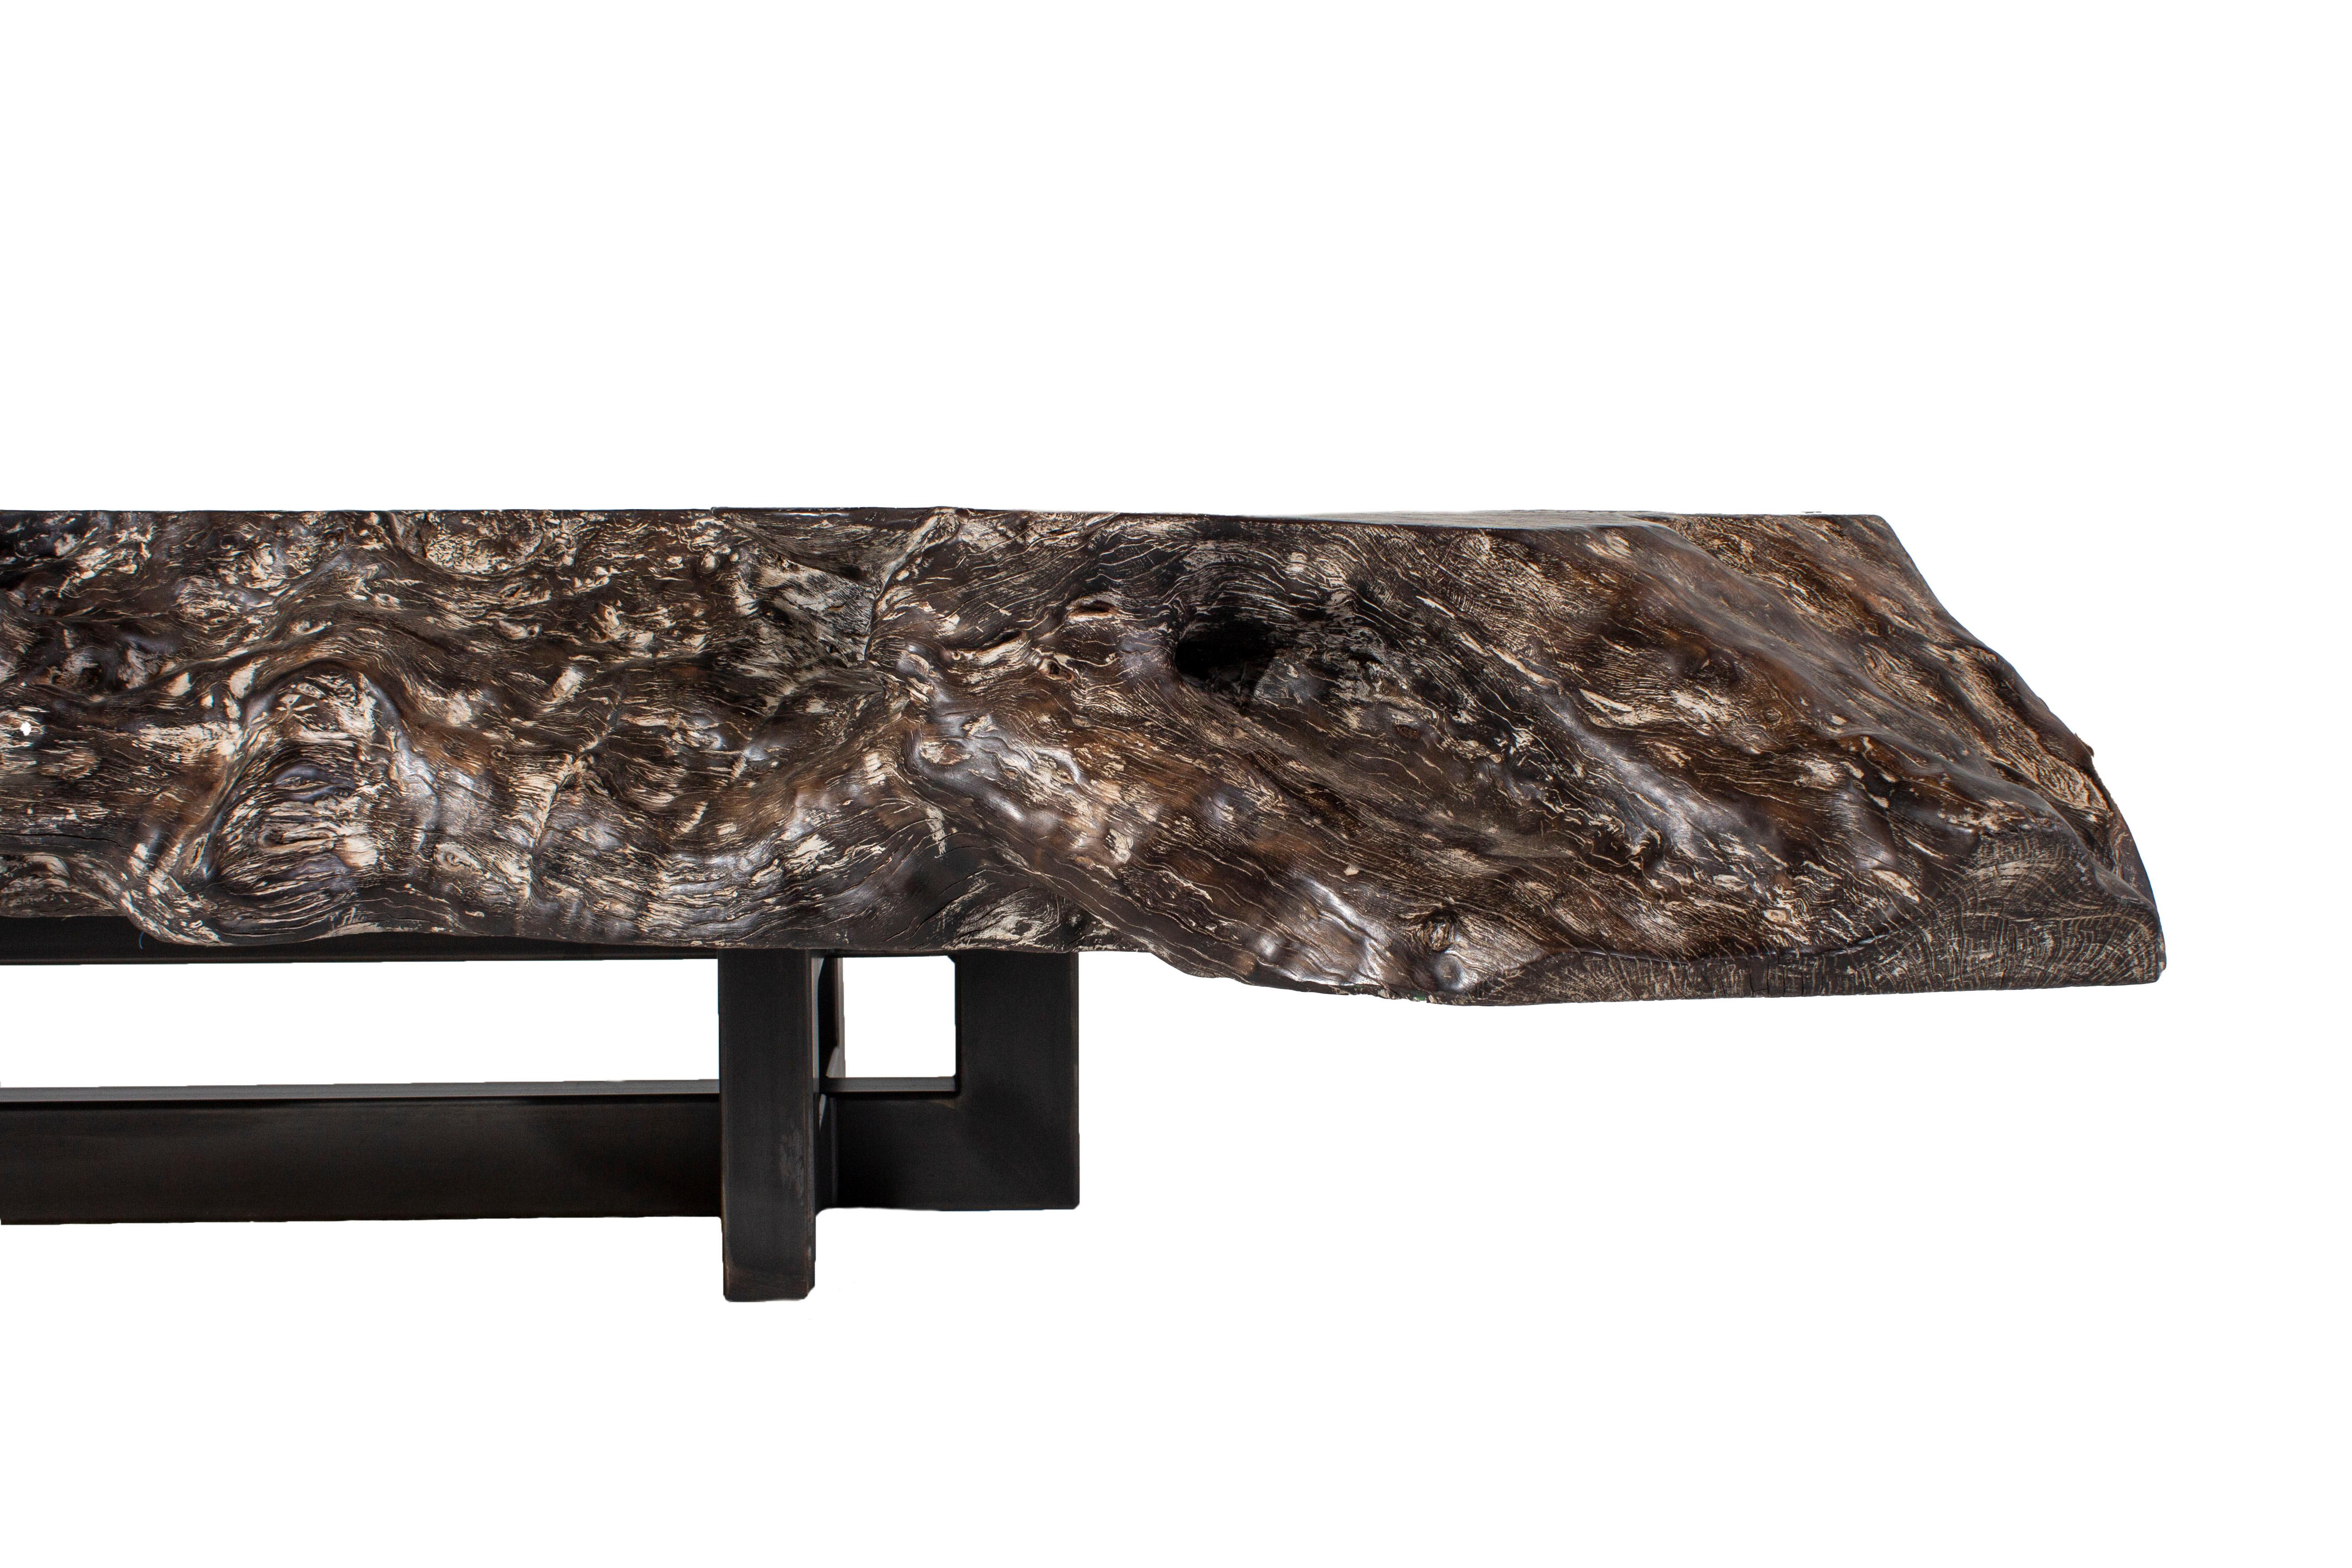 Organic Modern Gray Toned Bleached Organic Form Lyche Wood Coffee Table